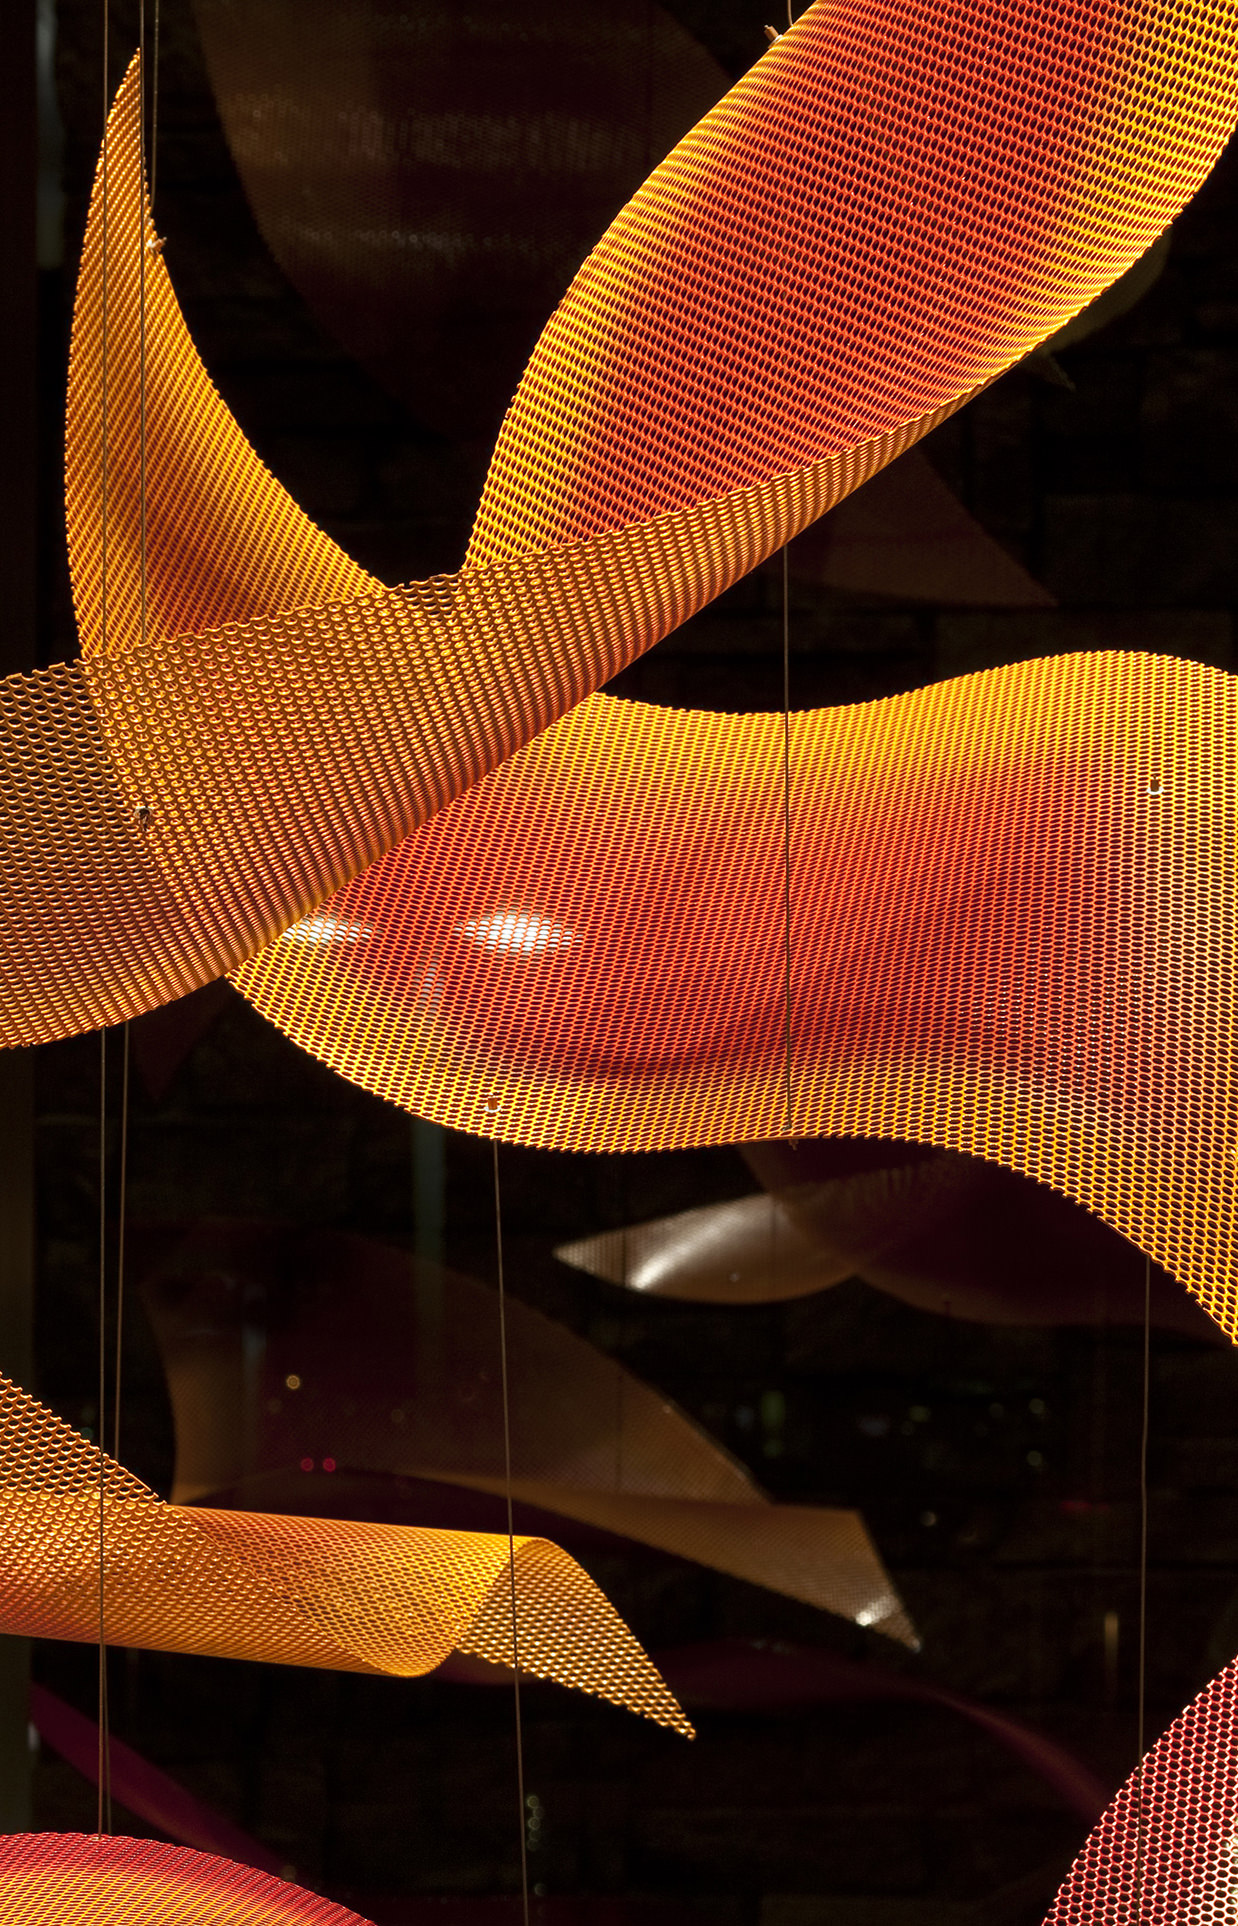 Vibrant orange and yellow petals from Sunrise Cascade, contemporary sculpture by Talley Fisher